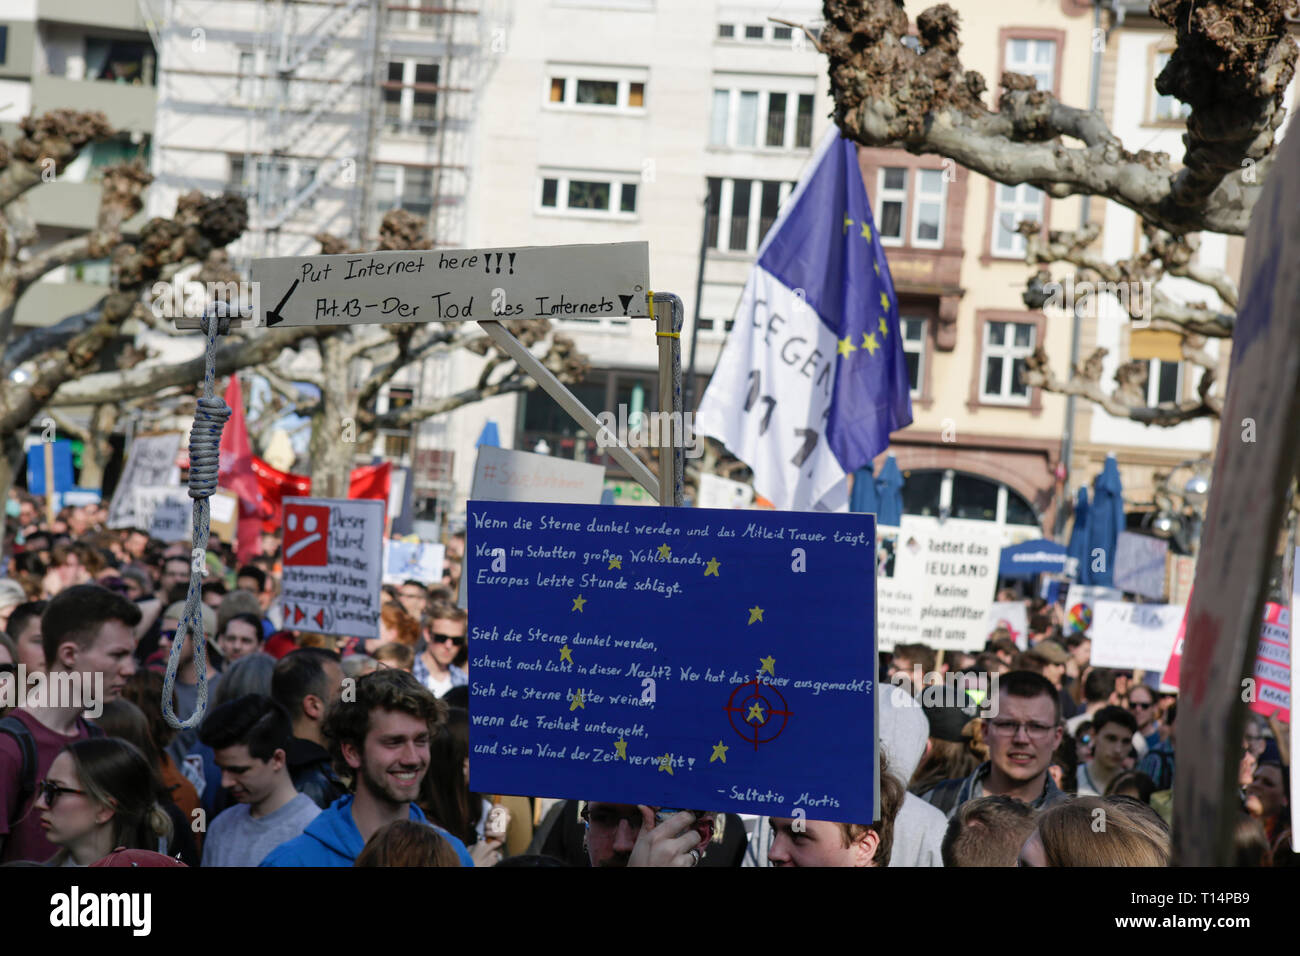 Frankfurt, Germany. 23rd Mar, 2019. Protesters have assembled with signs outside the Paulskirche in Frankfurt. More than 15,000 protesters marched through Frankfurt calling for the Internet to remain free and to not to pass the new EU Copyright Directive into law. The protest was part of a Germany wide day of protest against the EU directive. Credit: Michael Debets/Pacific Press/Alamy Live News Stock Photo